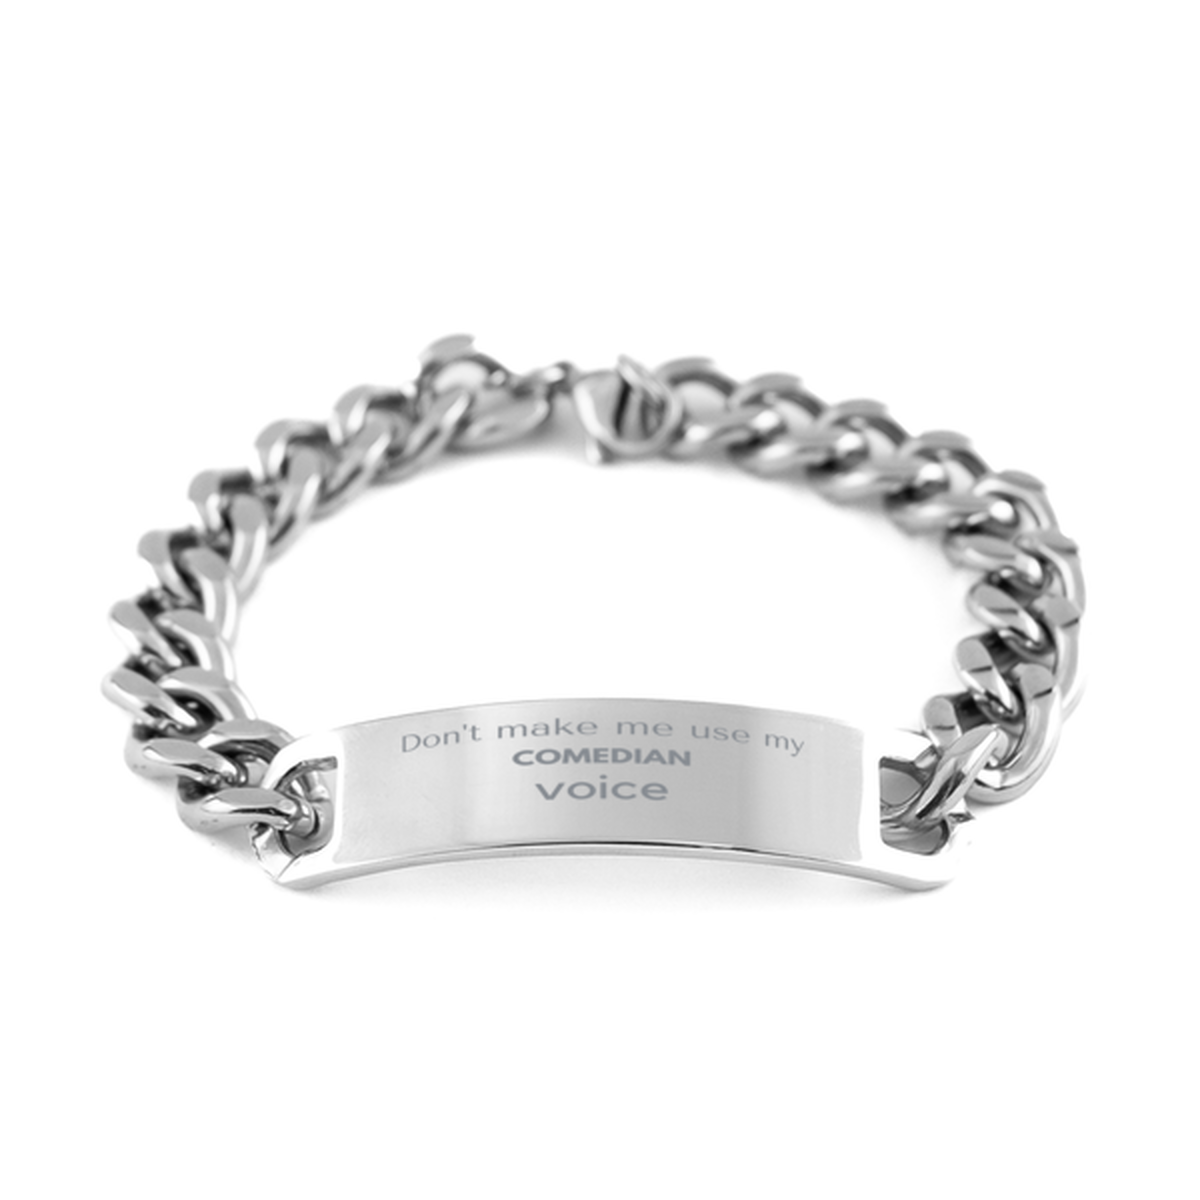 Don't make me use my Comedian voice, Sarcasm Comedian Gifts, Christmas Comedian Cuban Chain Stainless Steel Bracelet Birthday Unique Gifts For Comedian Coworkers, Men, Women, Colleague, Friends